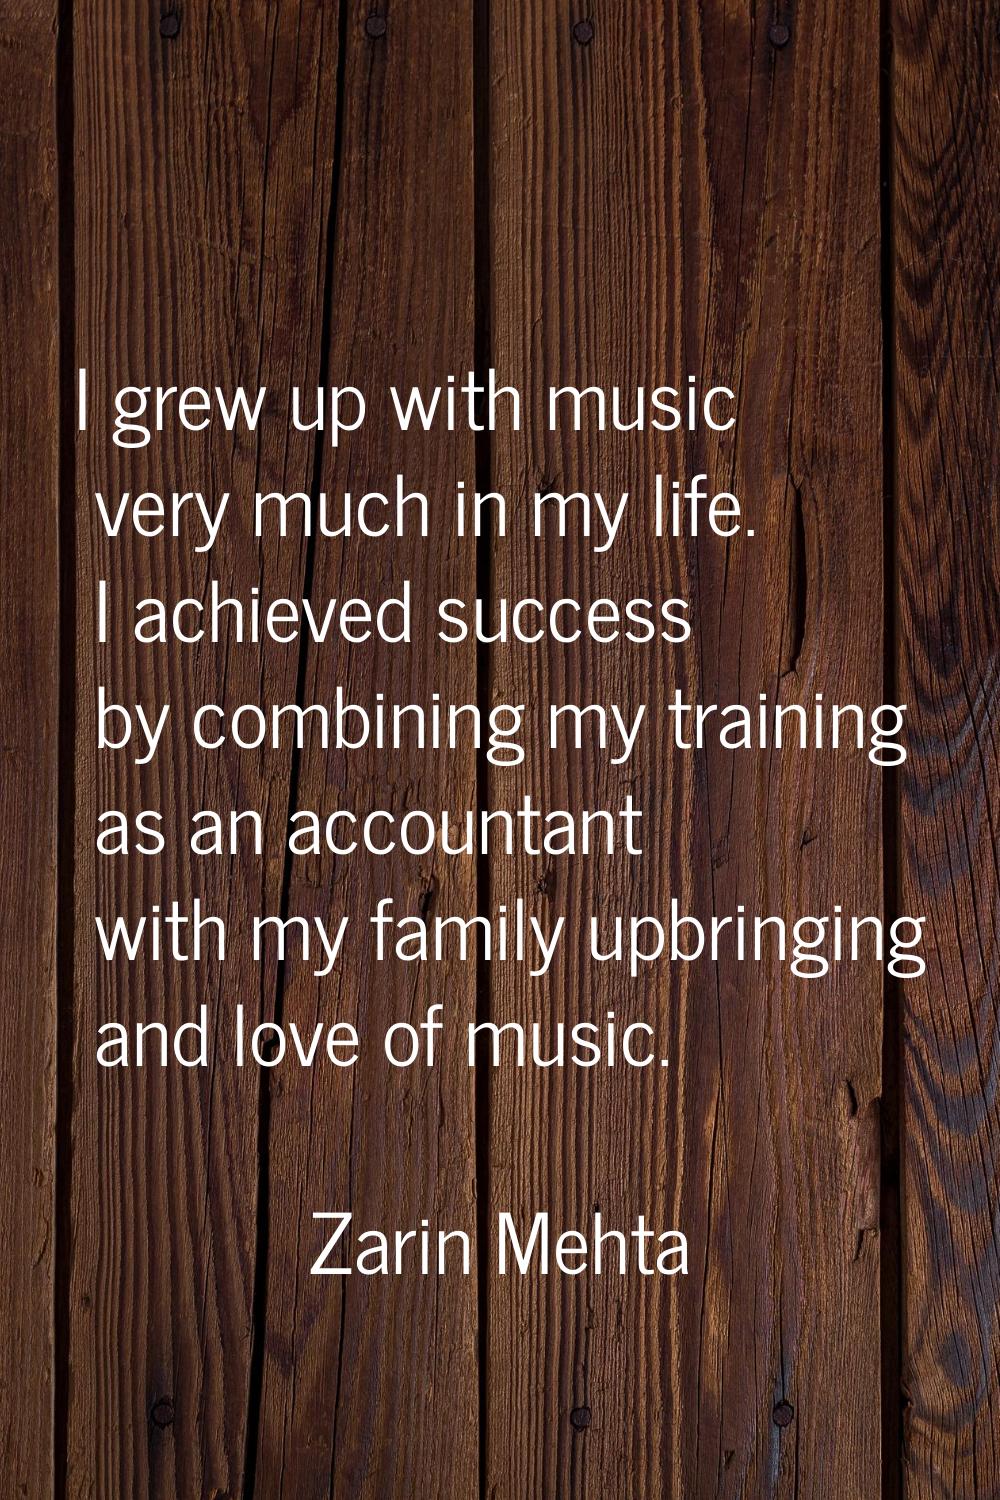 I grew up with music very much in my life. I achieved success by combining my training as an accoun